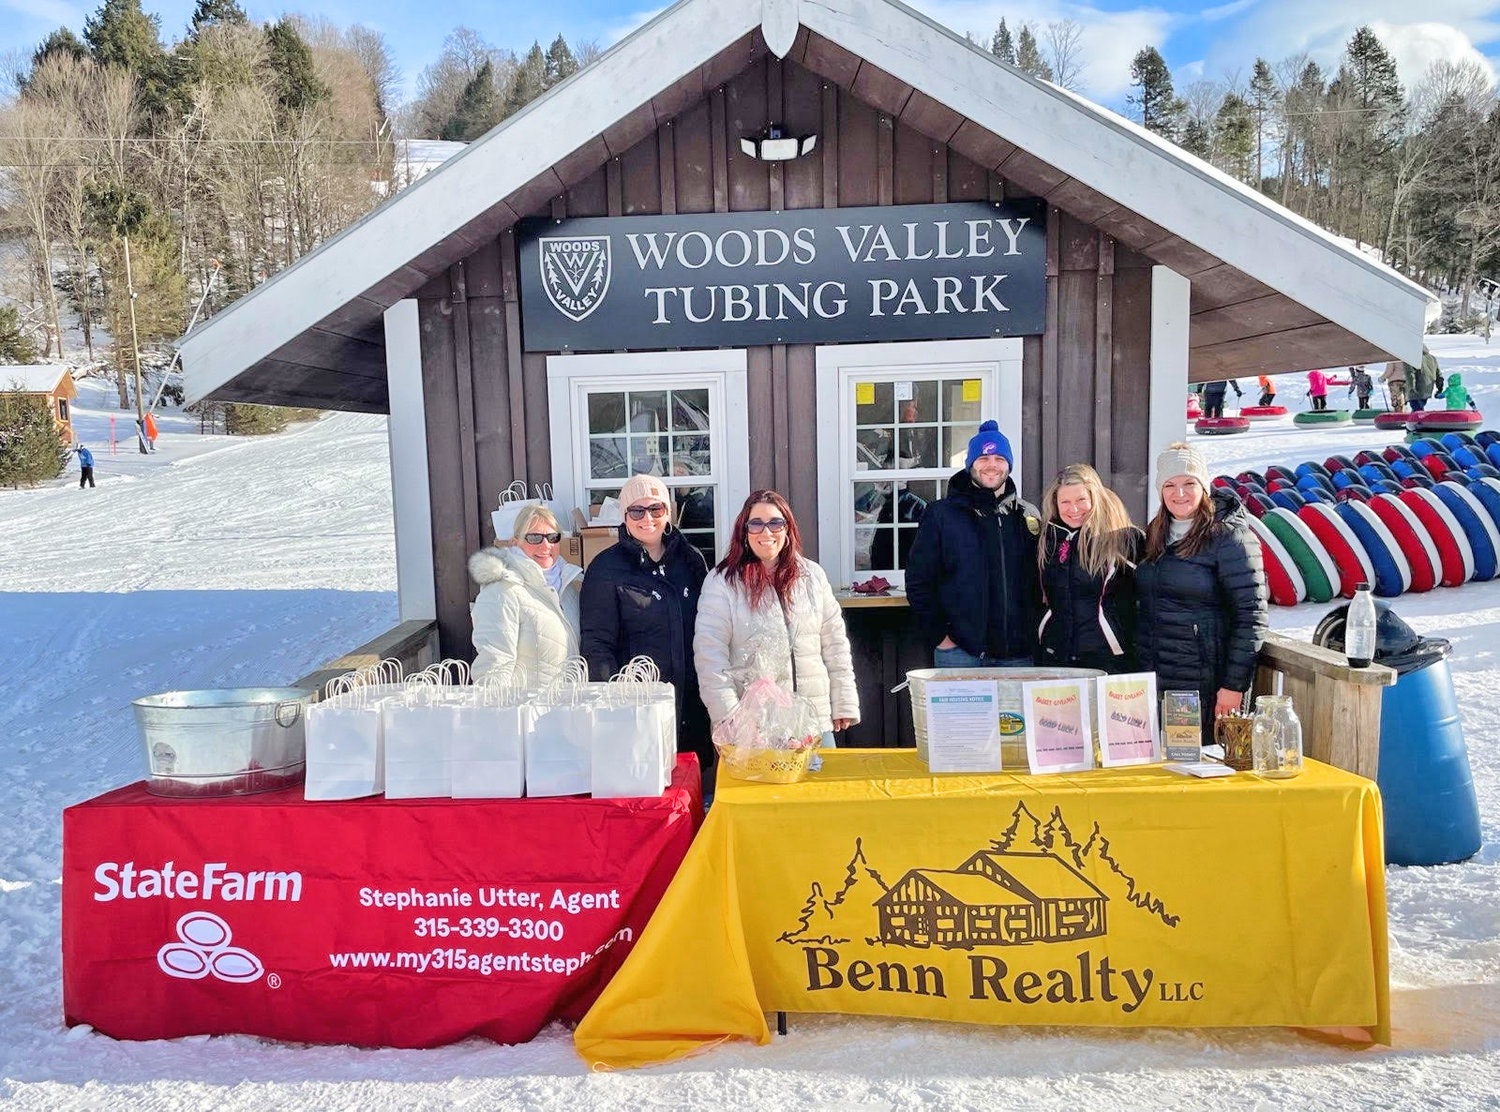 COMMUNITY SUPPORT — The Rome office of Benn Realty and Stephanie Utter, State Farm agent, recently co-sponsored a free tubing event at the Woods Valley Ski Center for those that picked up tickets at either office prior to the event. In addition to the free tubing, the sponsors also provided some refreshments for families as well as gift bags for event participants.